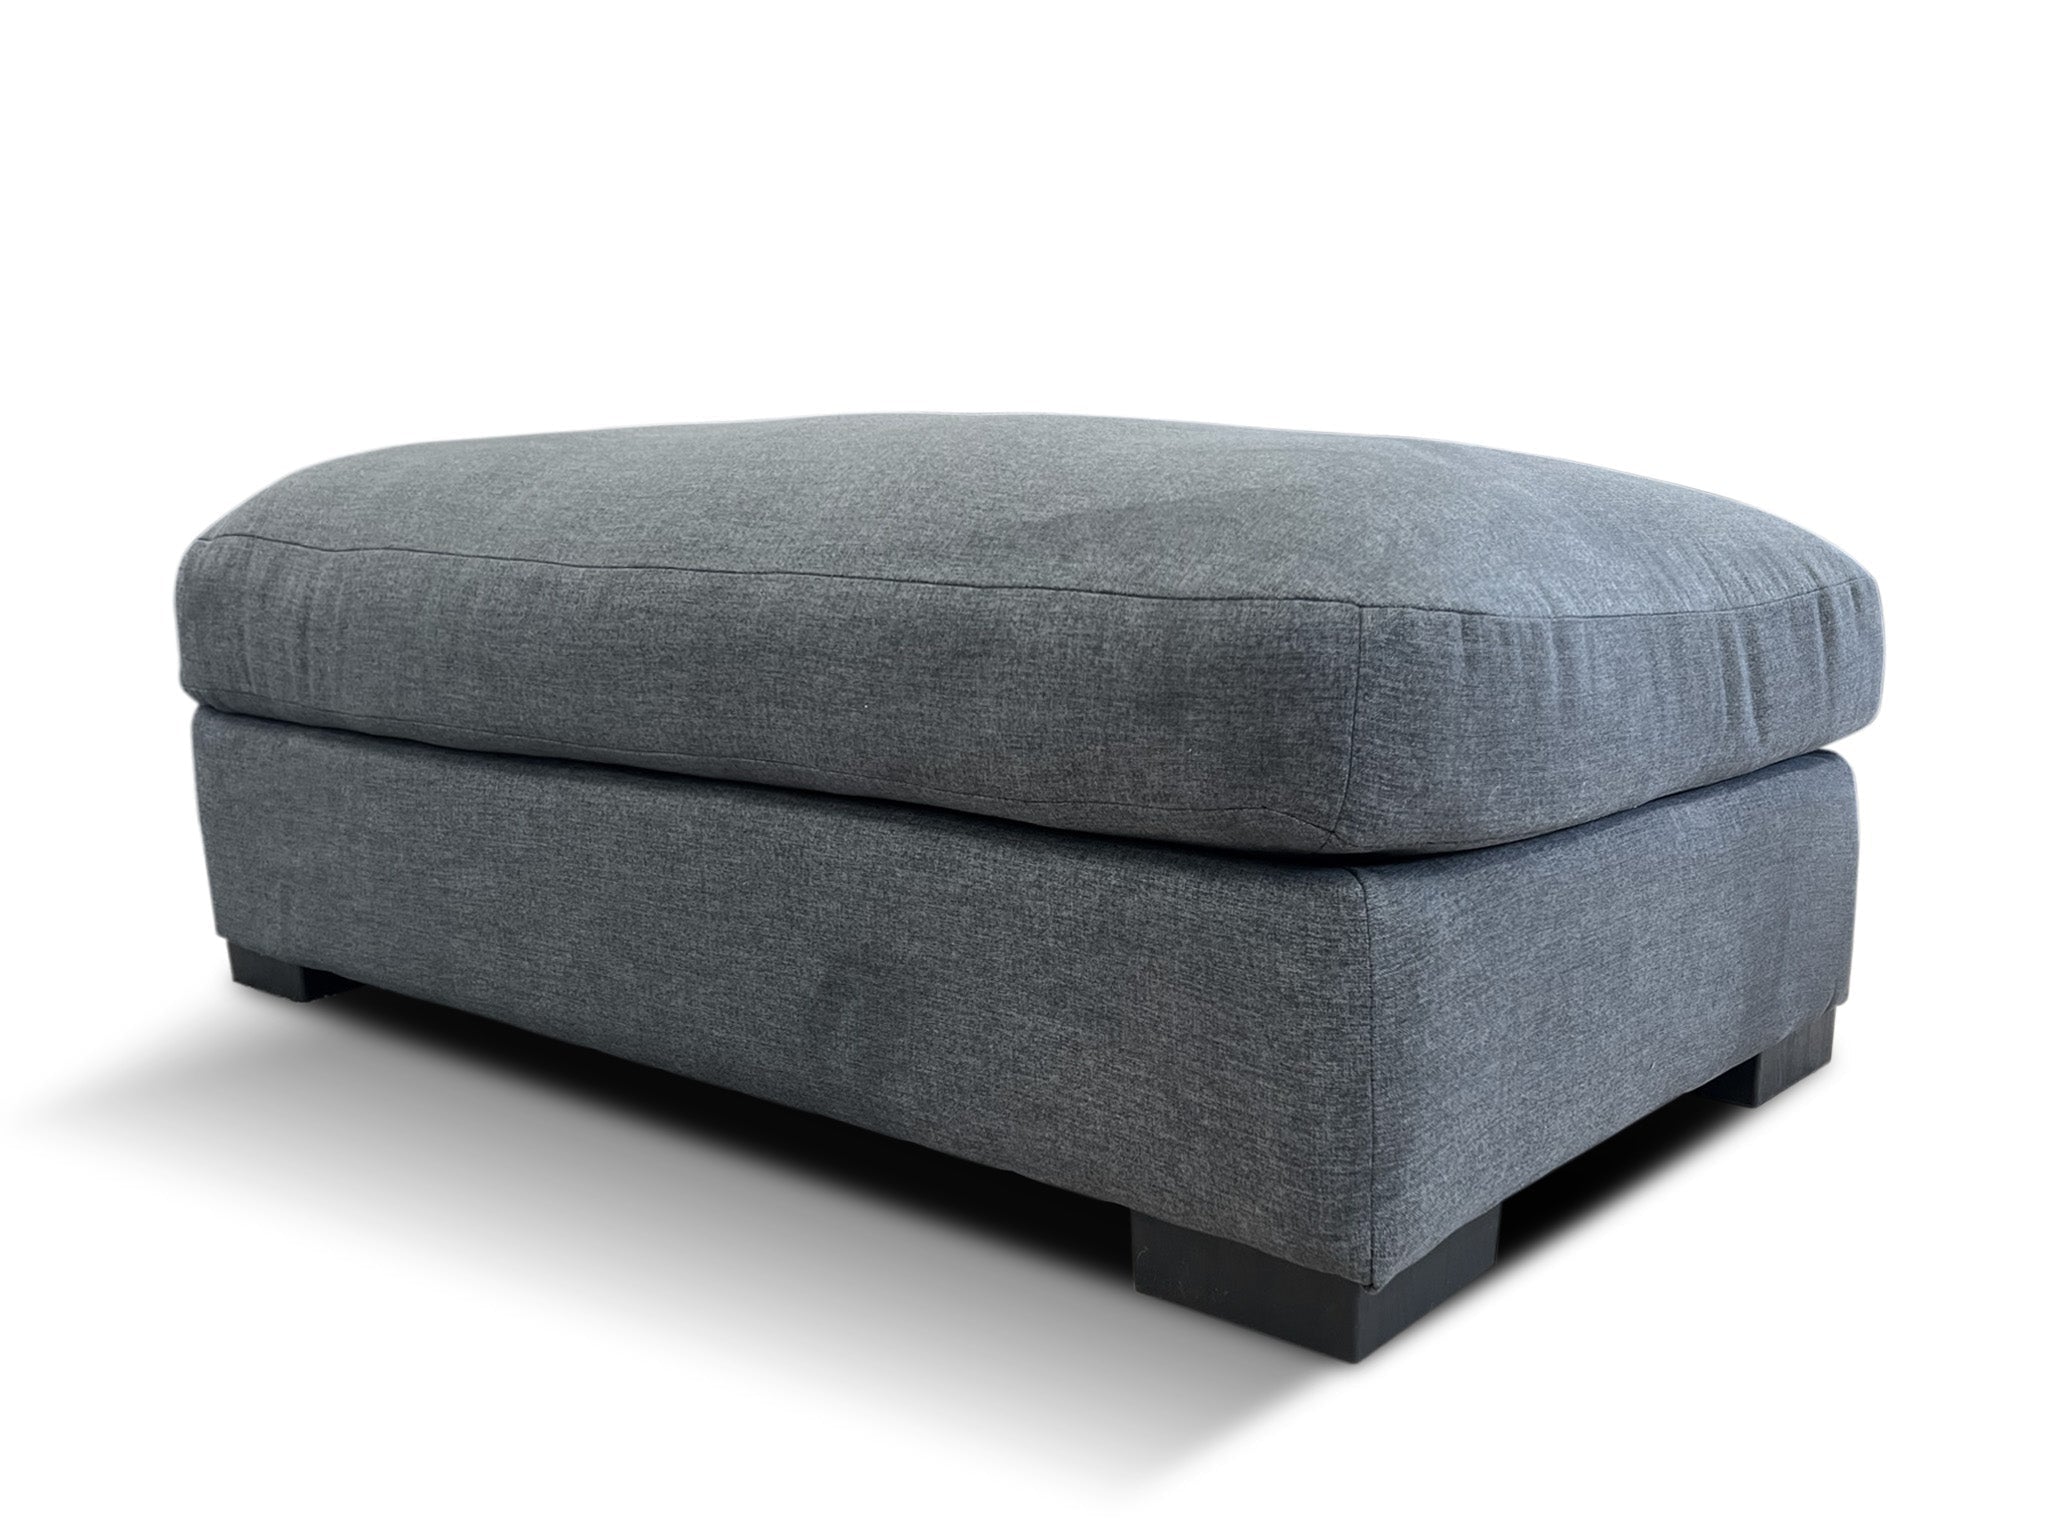 Montego ottoman In Storm